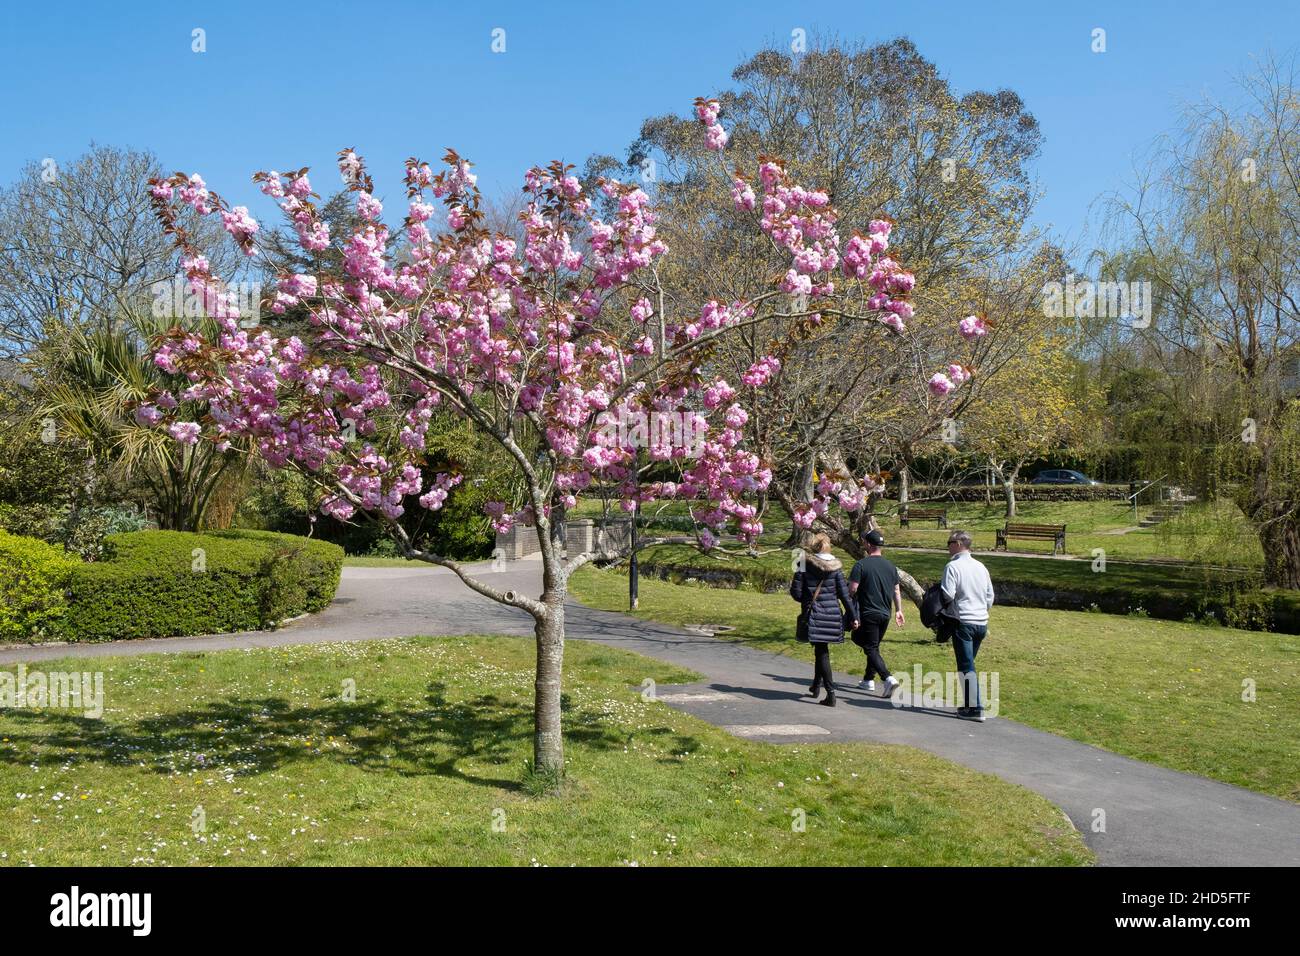 People walking past an ornamental Cherry tree in full blossom. Stock Photo